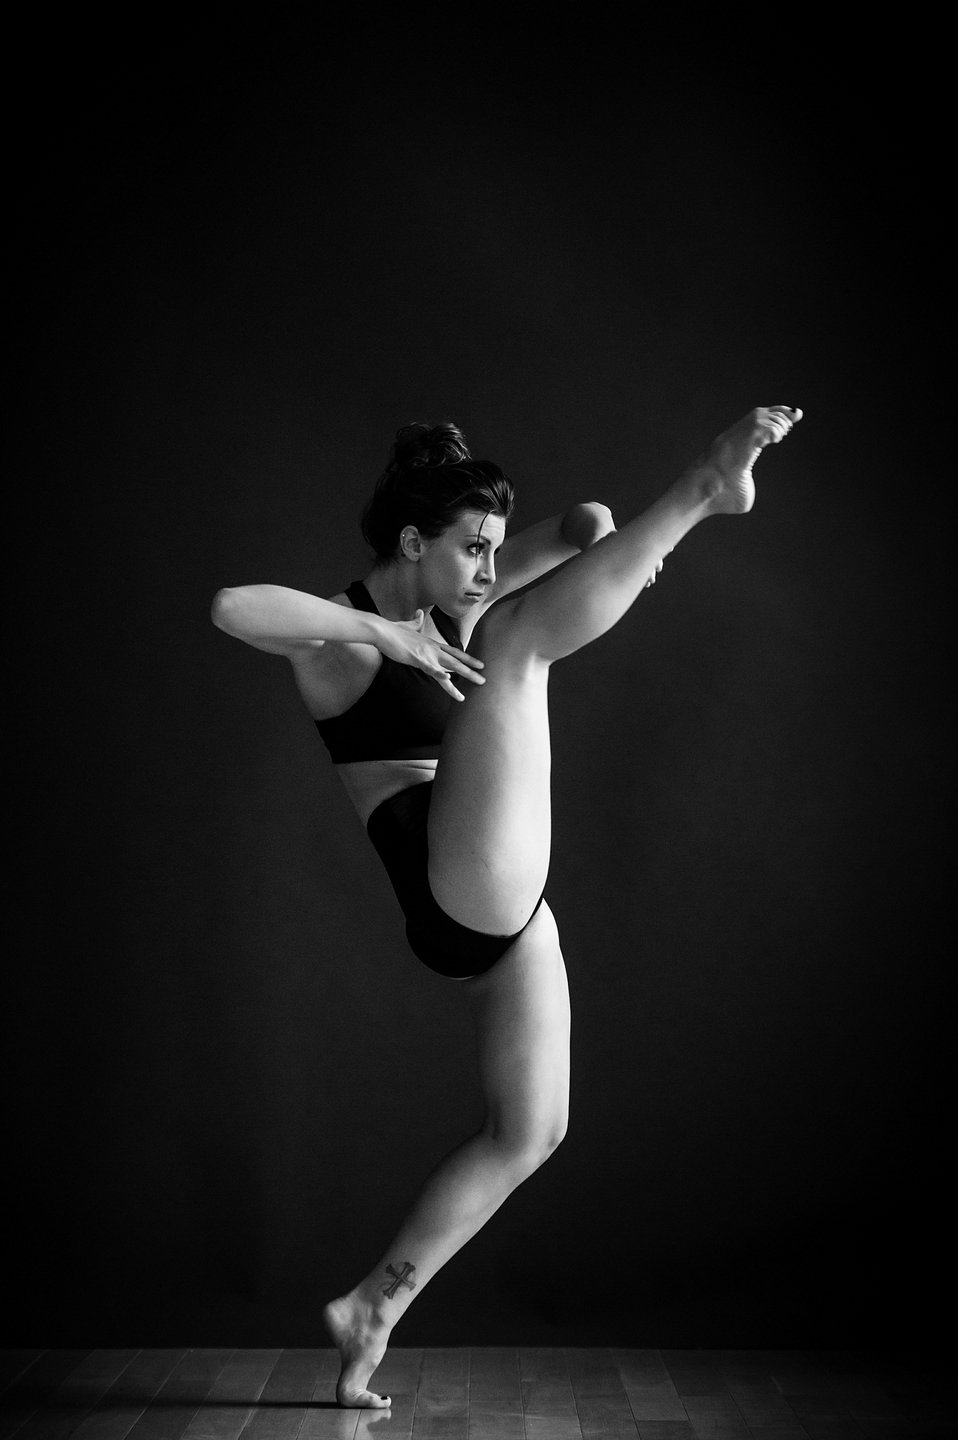 Los Angeles Dance Portrait Photo - Stephanie Abrams - by Tommy Xing Photography 04.jpg